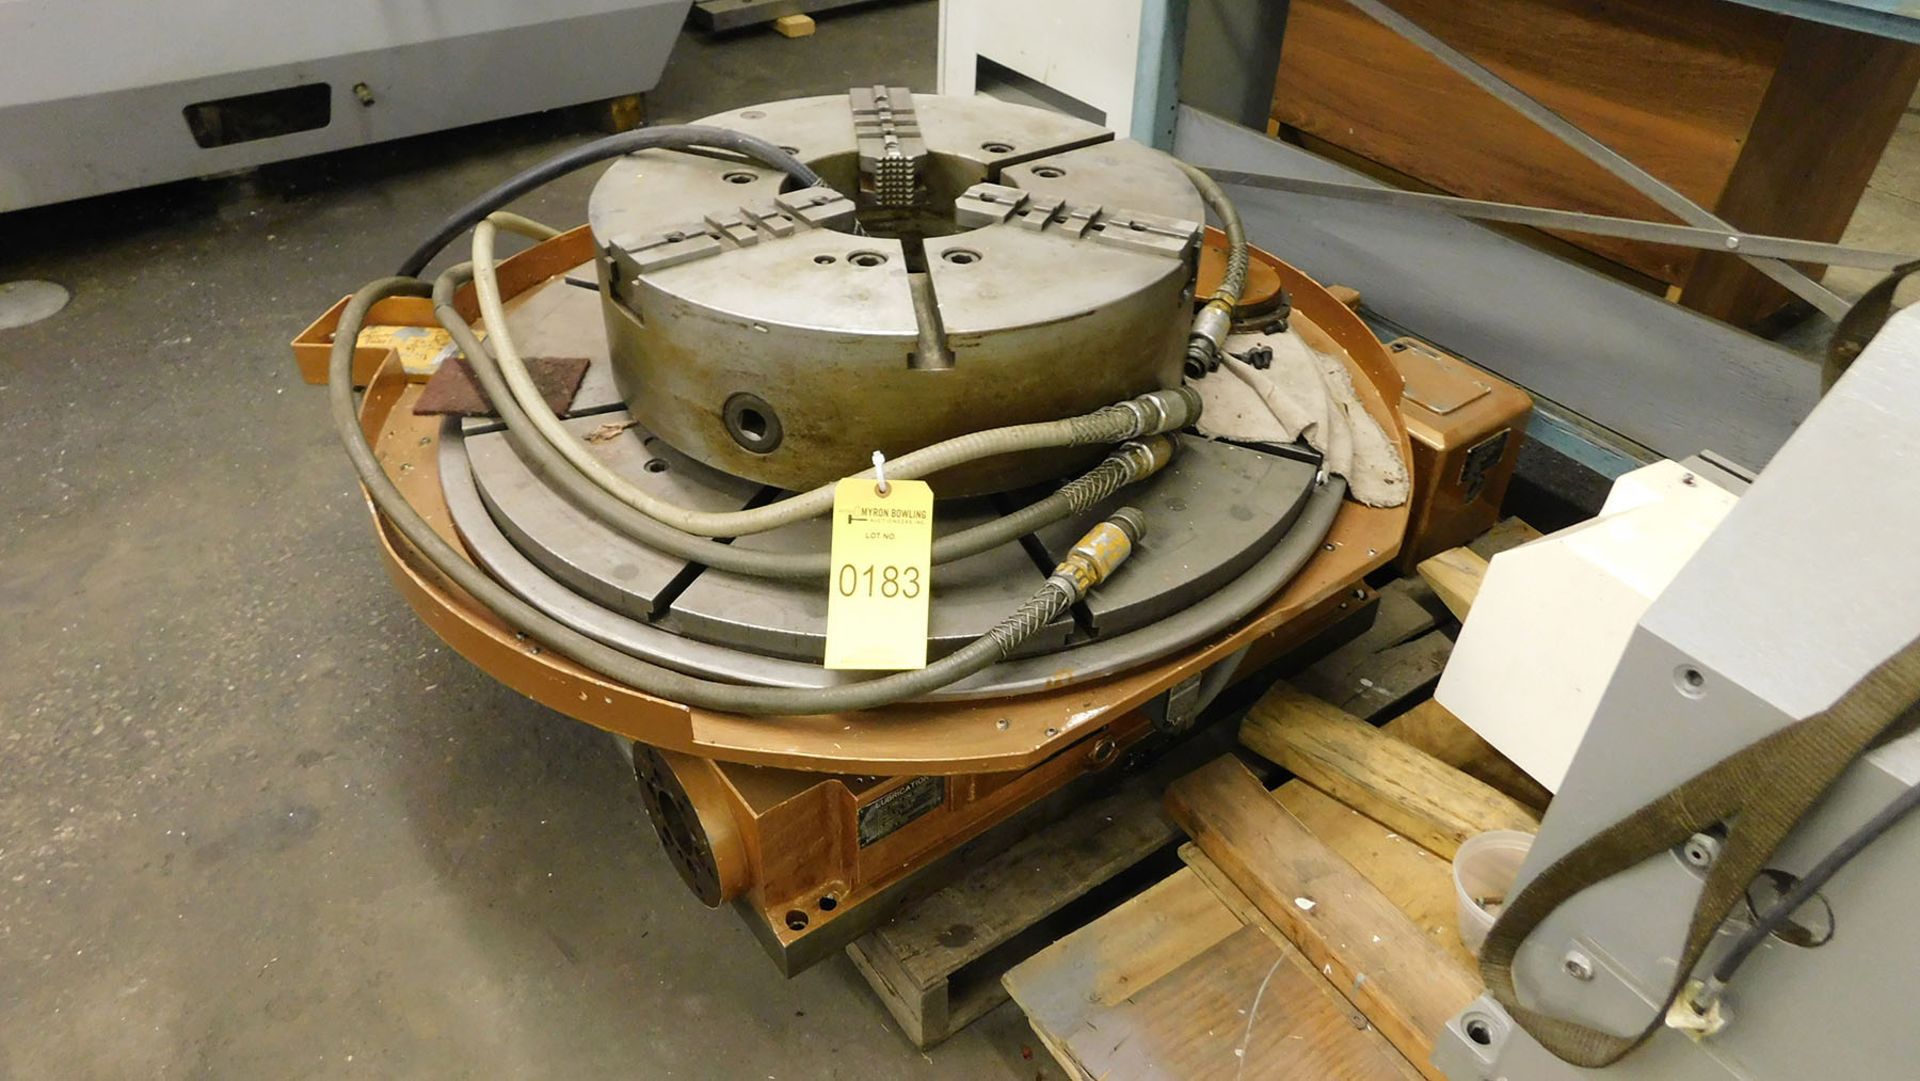 PRODUCTO MACHINE CO NC 34'' ROTARY TABLE; MODEL 0130, S/N J602-3 WITH A 24'' 3-JAW UNIVERSAL CHUCK - Image 3 of 4